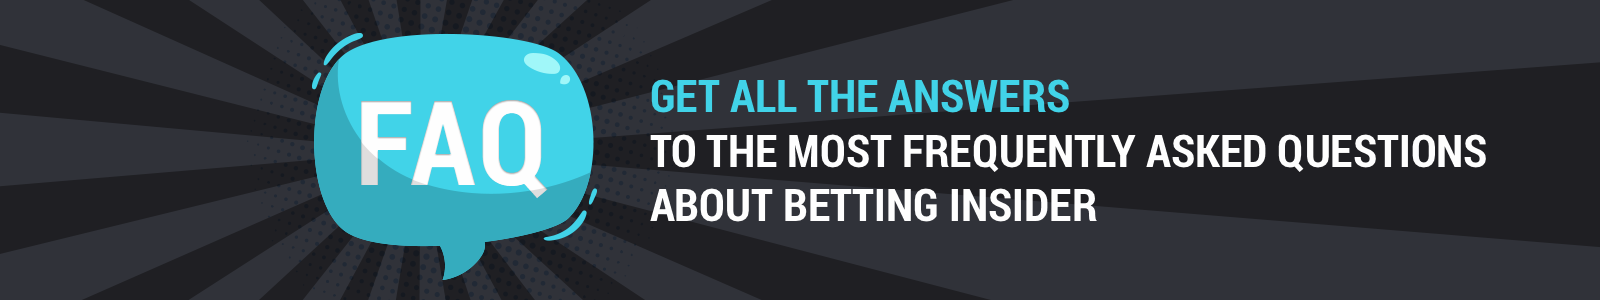 Online sports betting tips